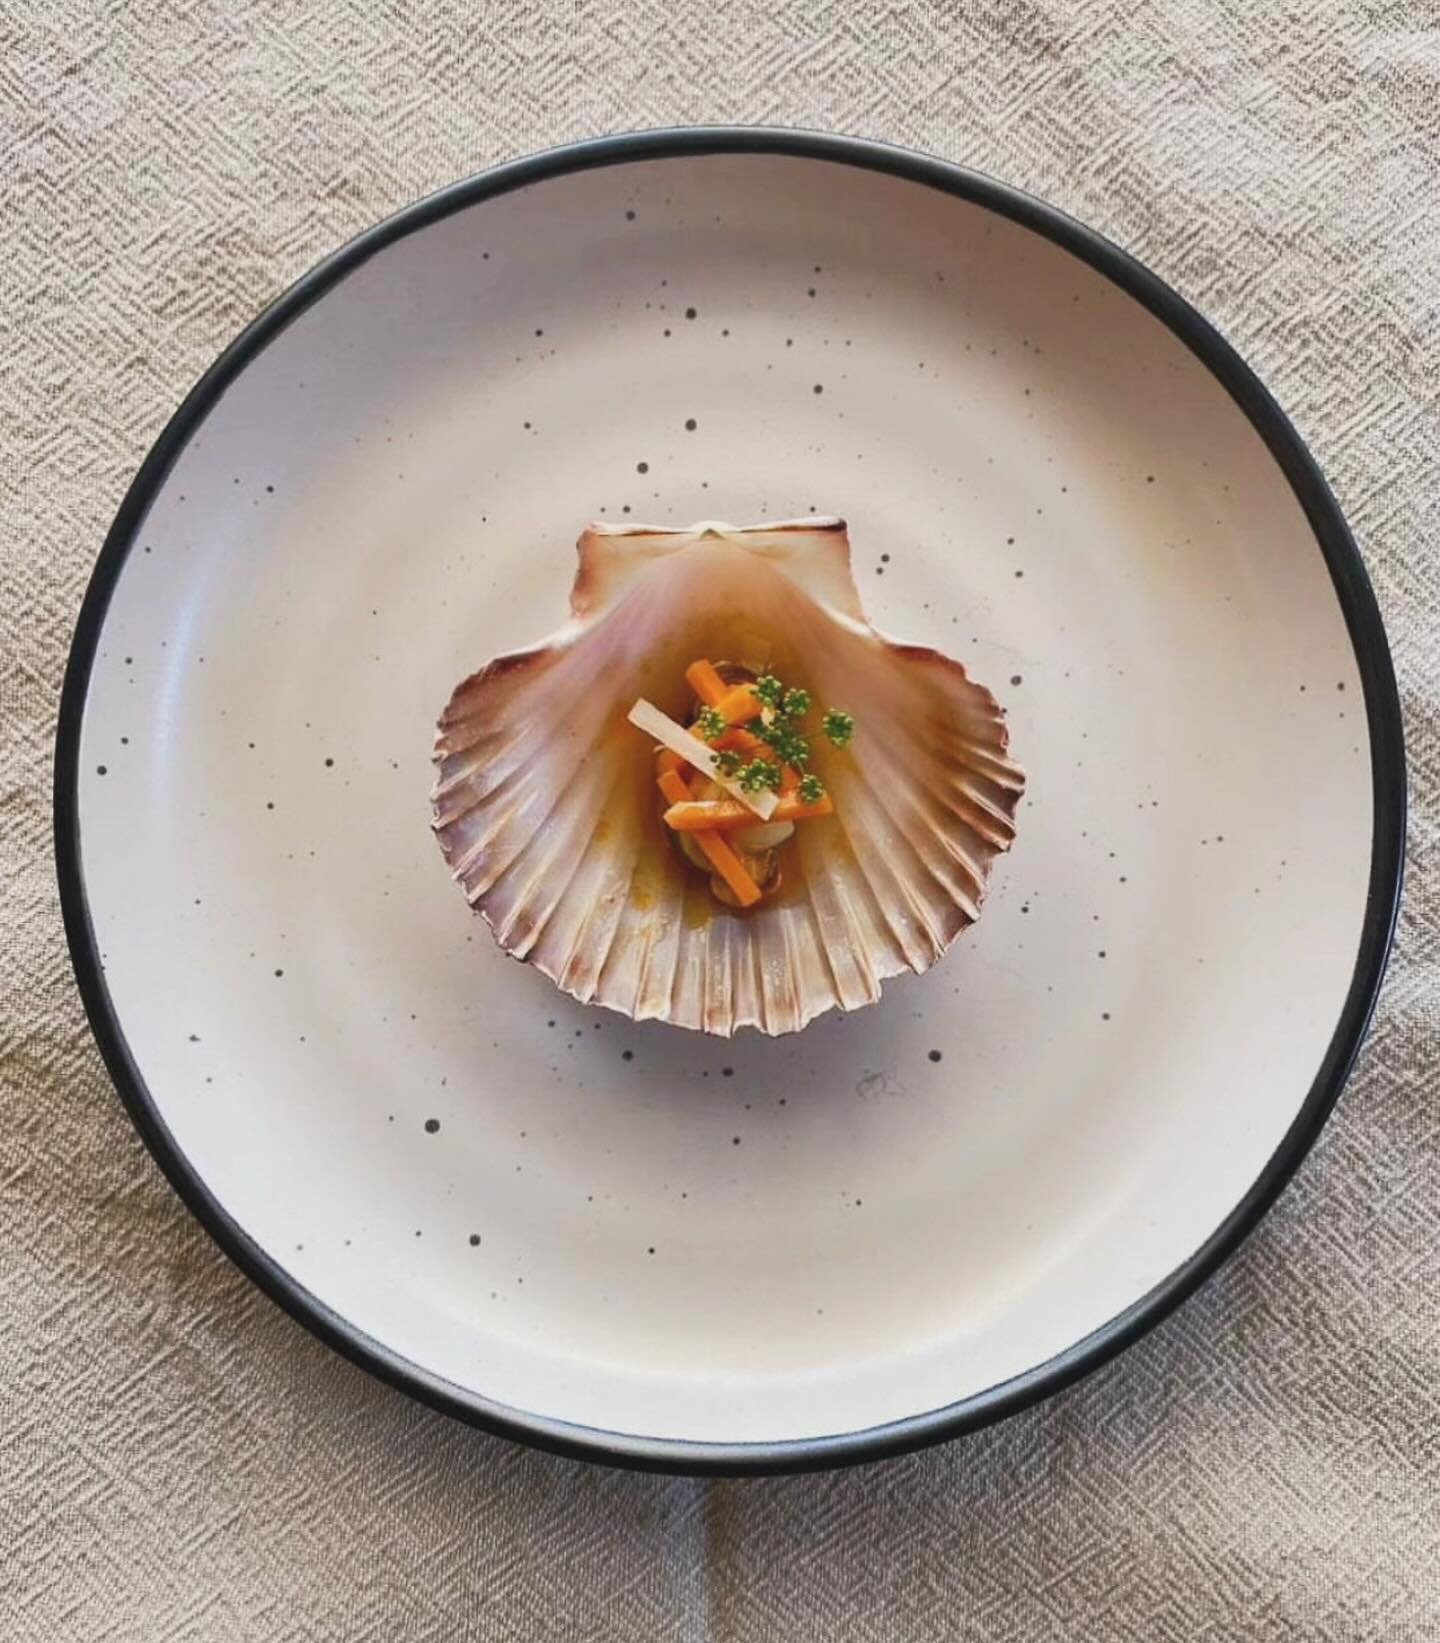 A sumptuous degustation feast in your own home with the knowledgeable Ruben from @atableof10. He took us from the north of Spain to the south through a series of authentic culinary delights. 
⠀⠀⠀⠀⠀⠀⠀⠀⠀
Quality produce combined with specific flavours 